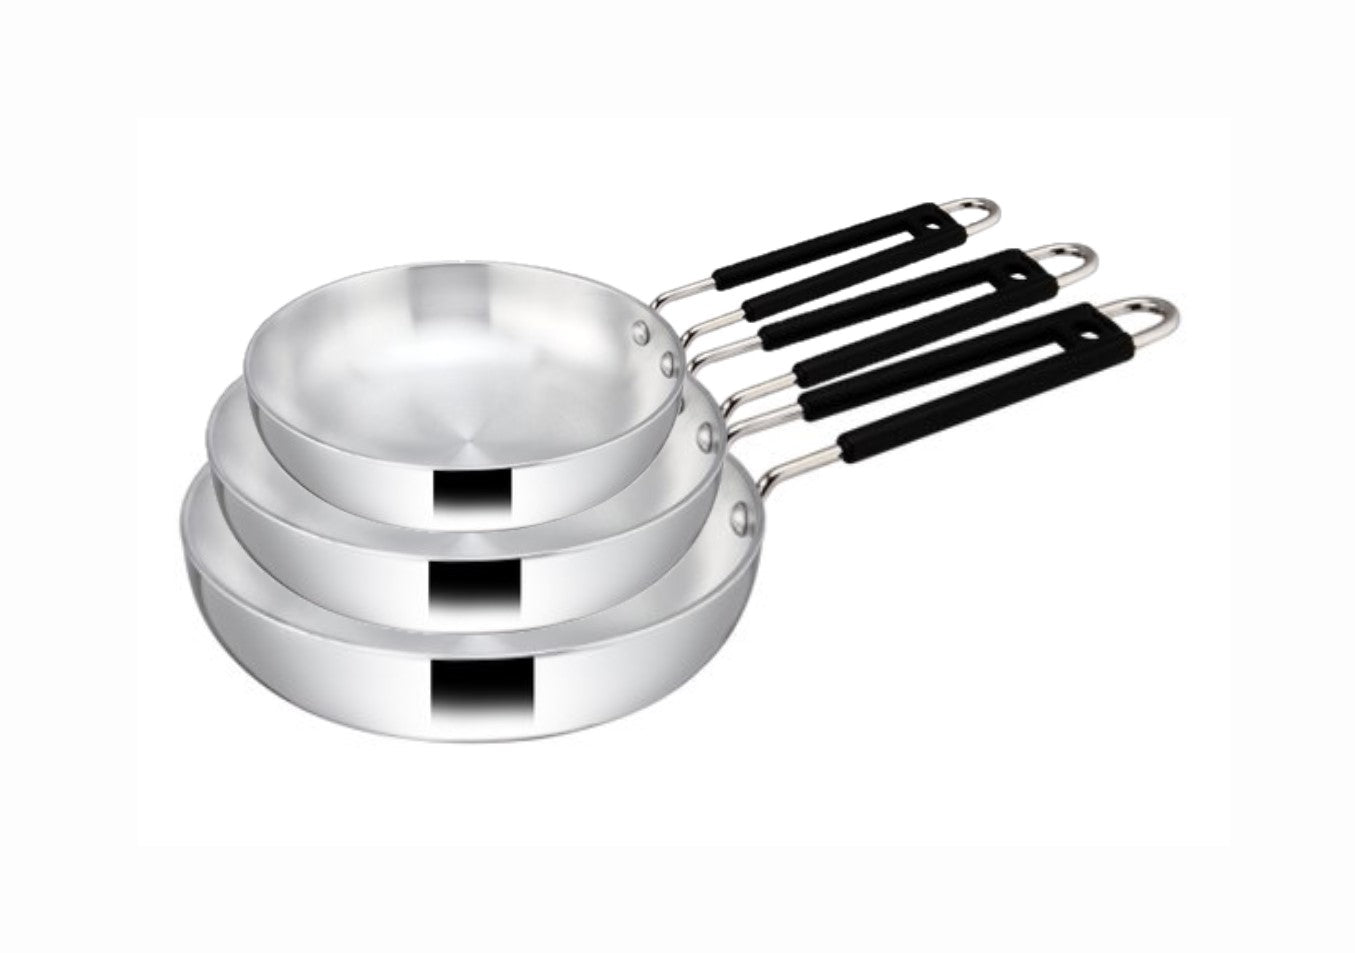 3 PC Aluminum Fry Pan With PVC Wire Handle